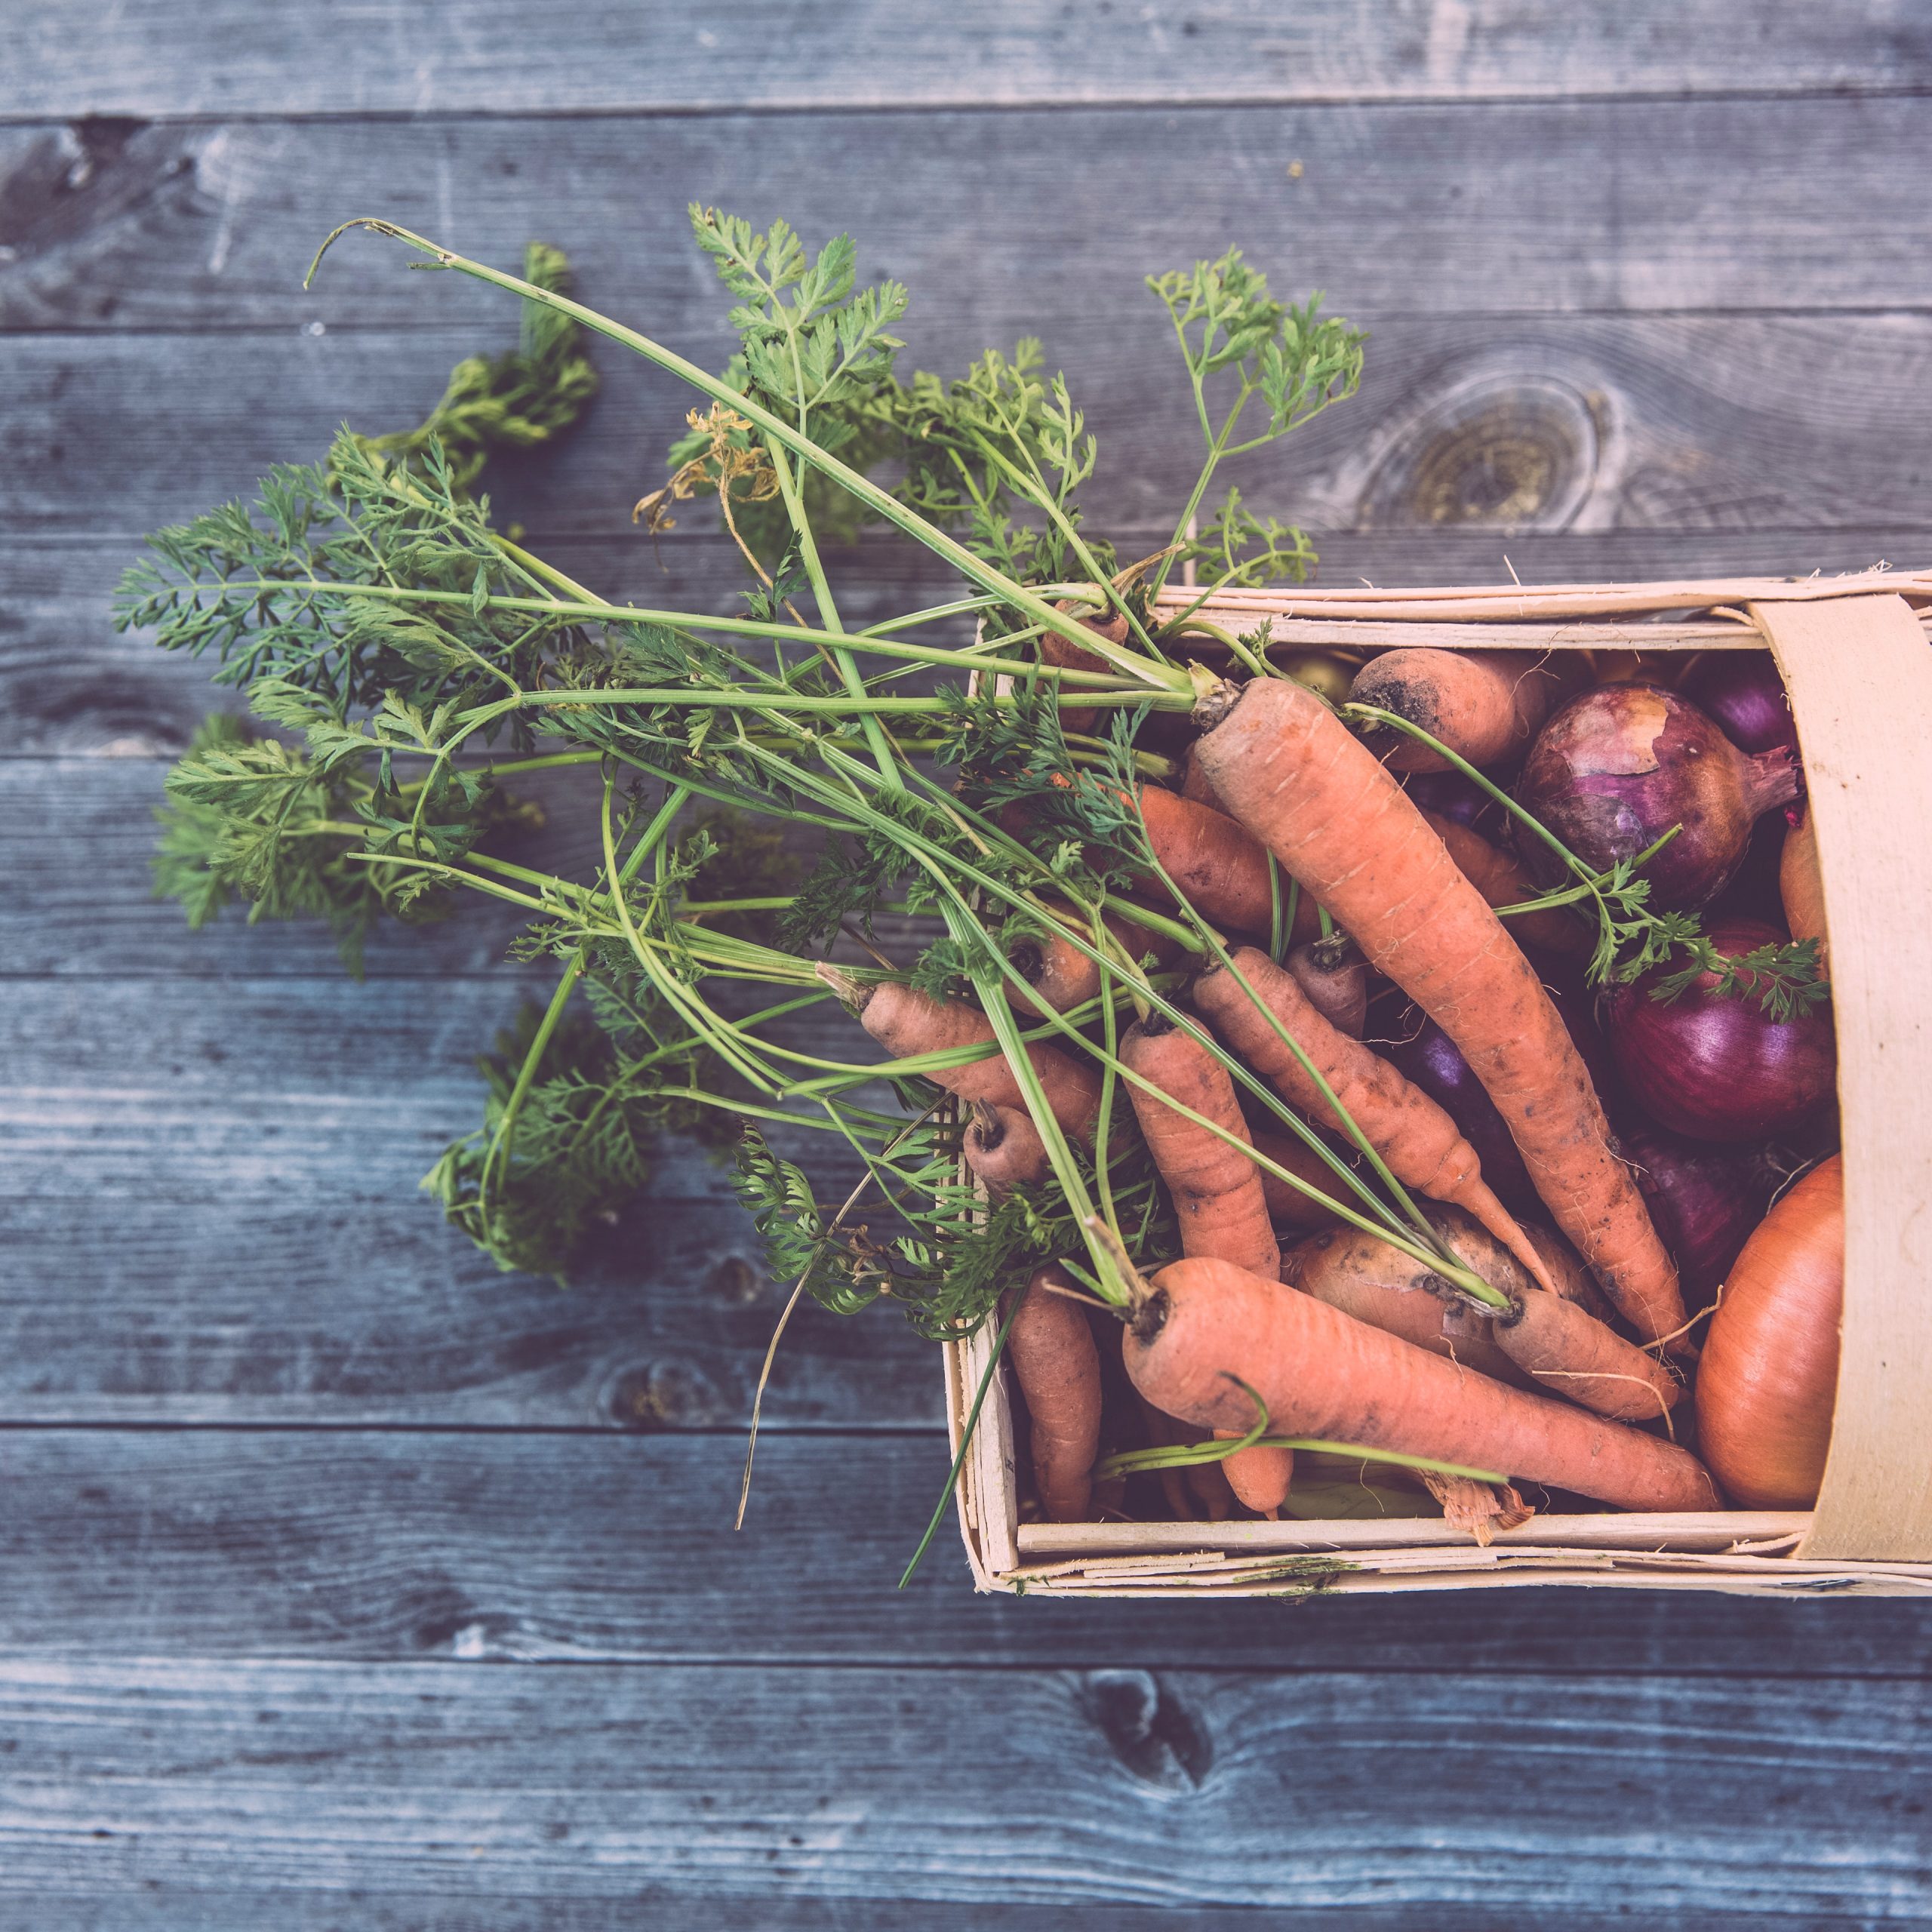 How to shop, eat and cook sustainably – in five easy steps